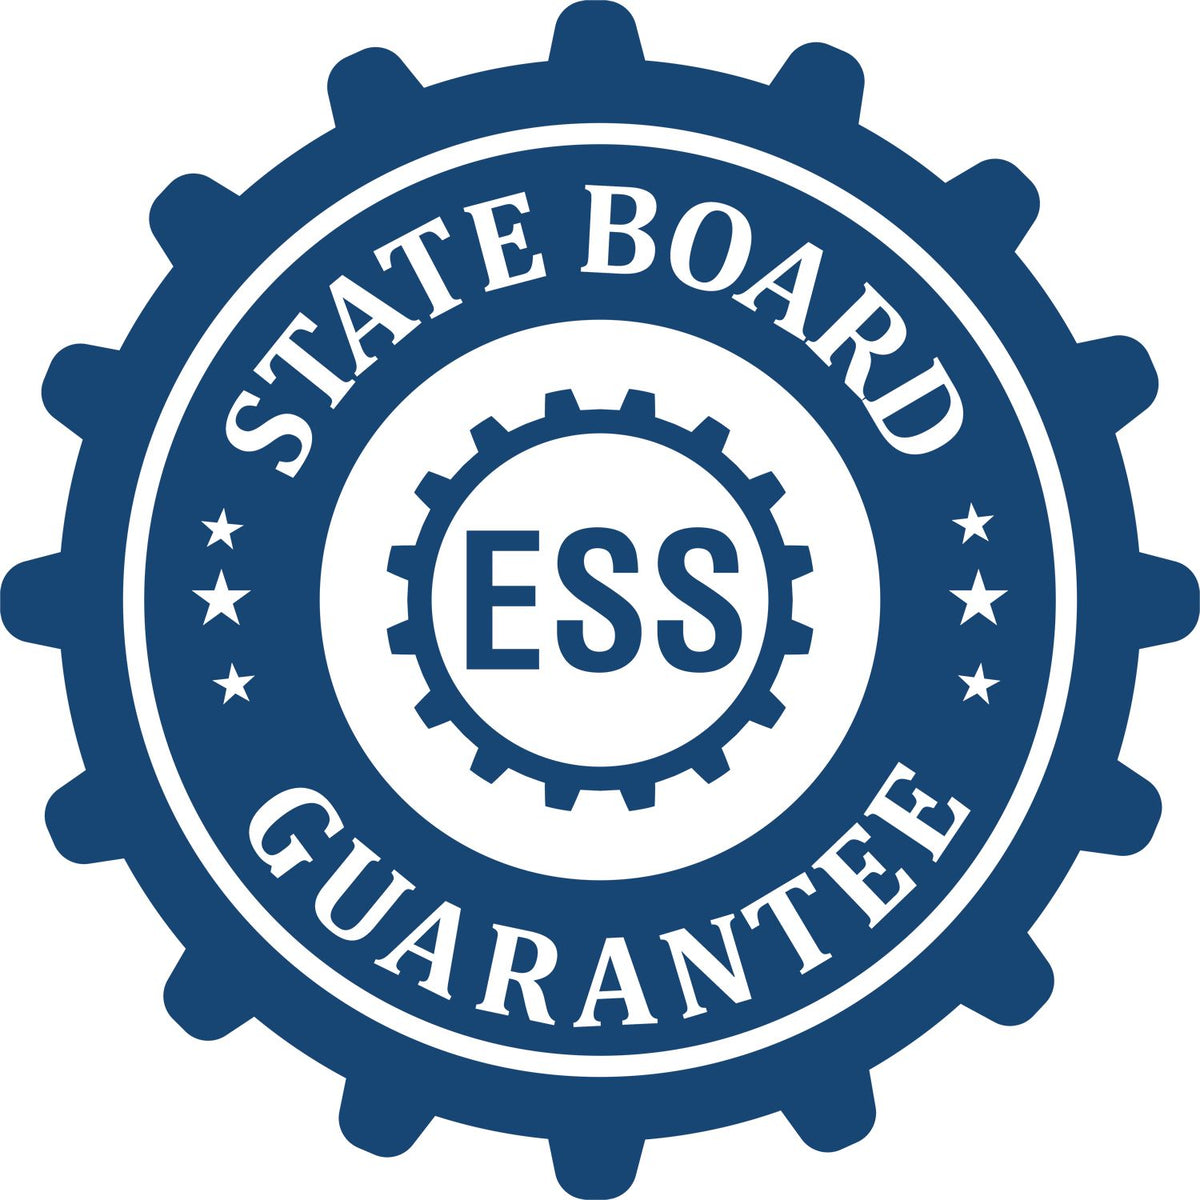 An emblem in a gear shape illustrating a state board guarantee for the Wooden Handle Nebraska State Seal Notary Public Stamp product.